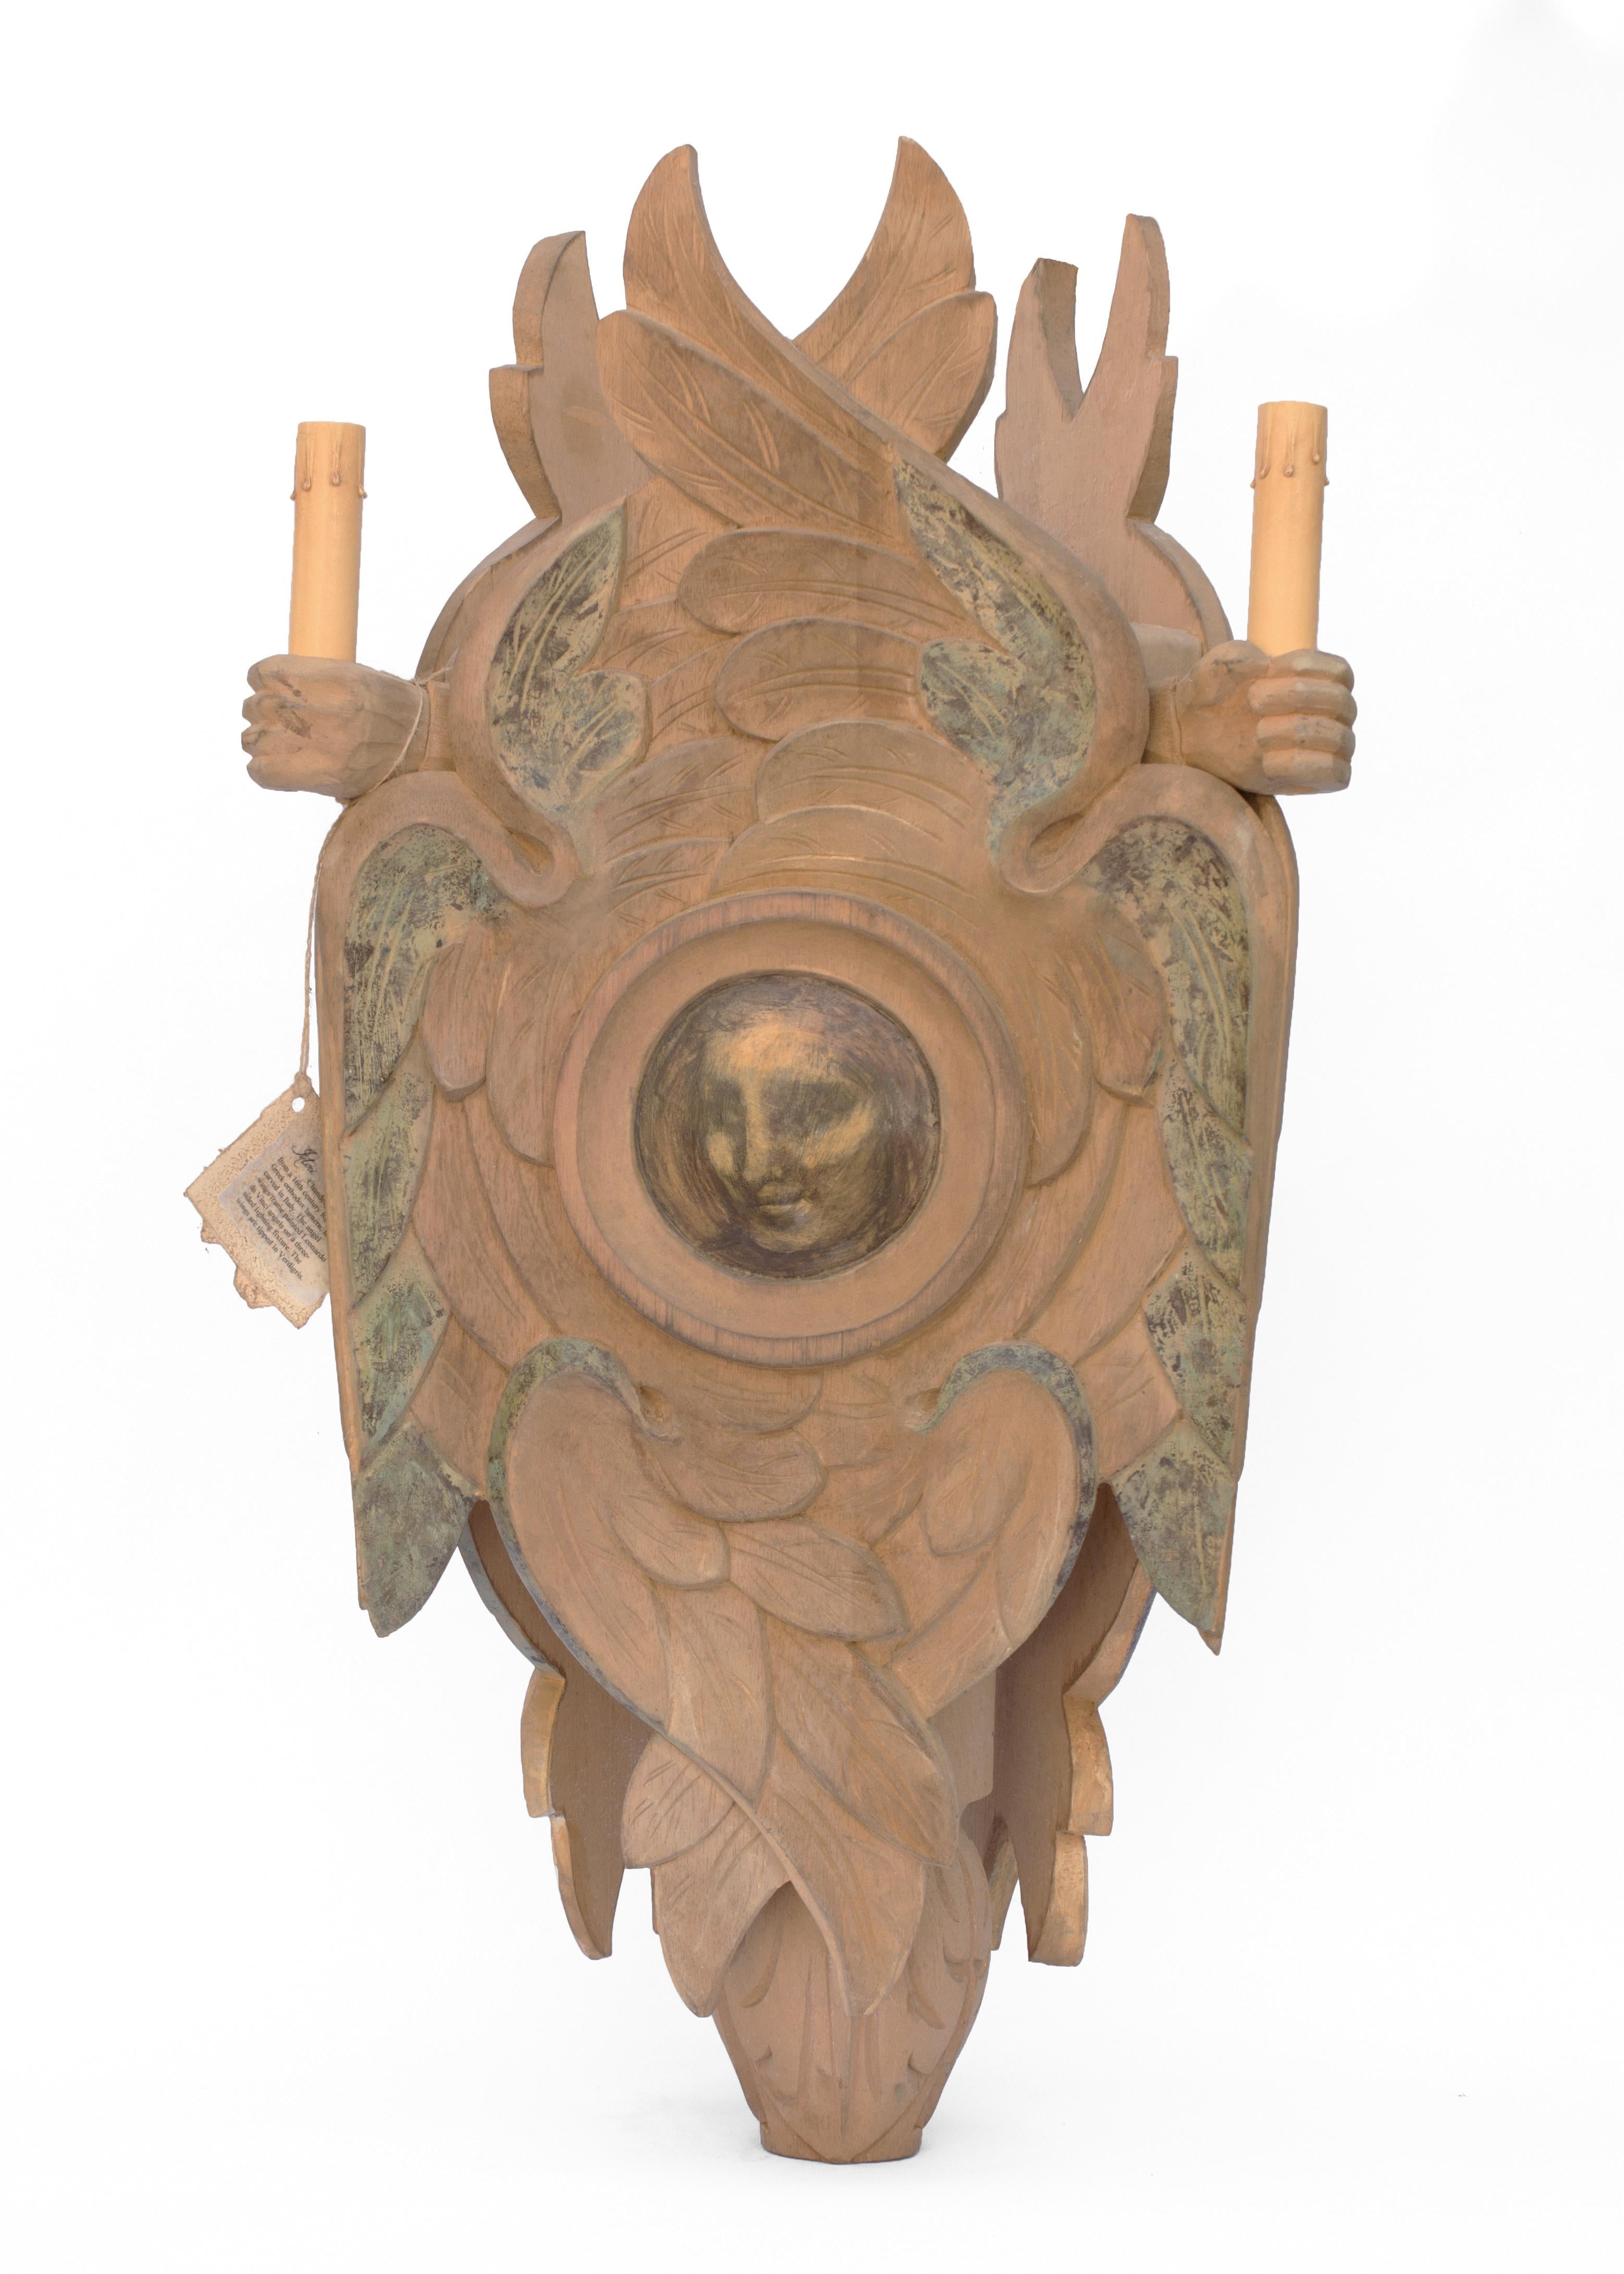 Hand-carved Italian painted wood lantern. This chandelier lantern inspired from a 16th century Russian Greek orthodox lantern. The angel faces attributed to Leonardo da Vinci and are on the three-sided lighting fixture with angel wings framing them.